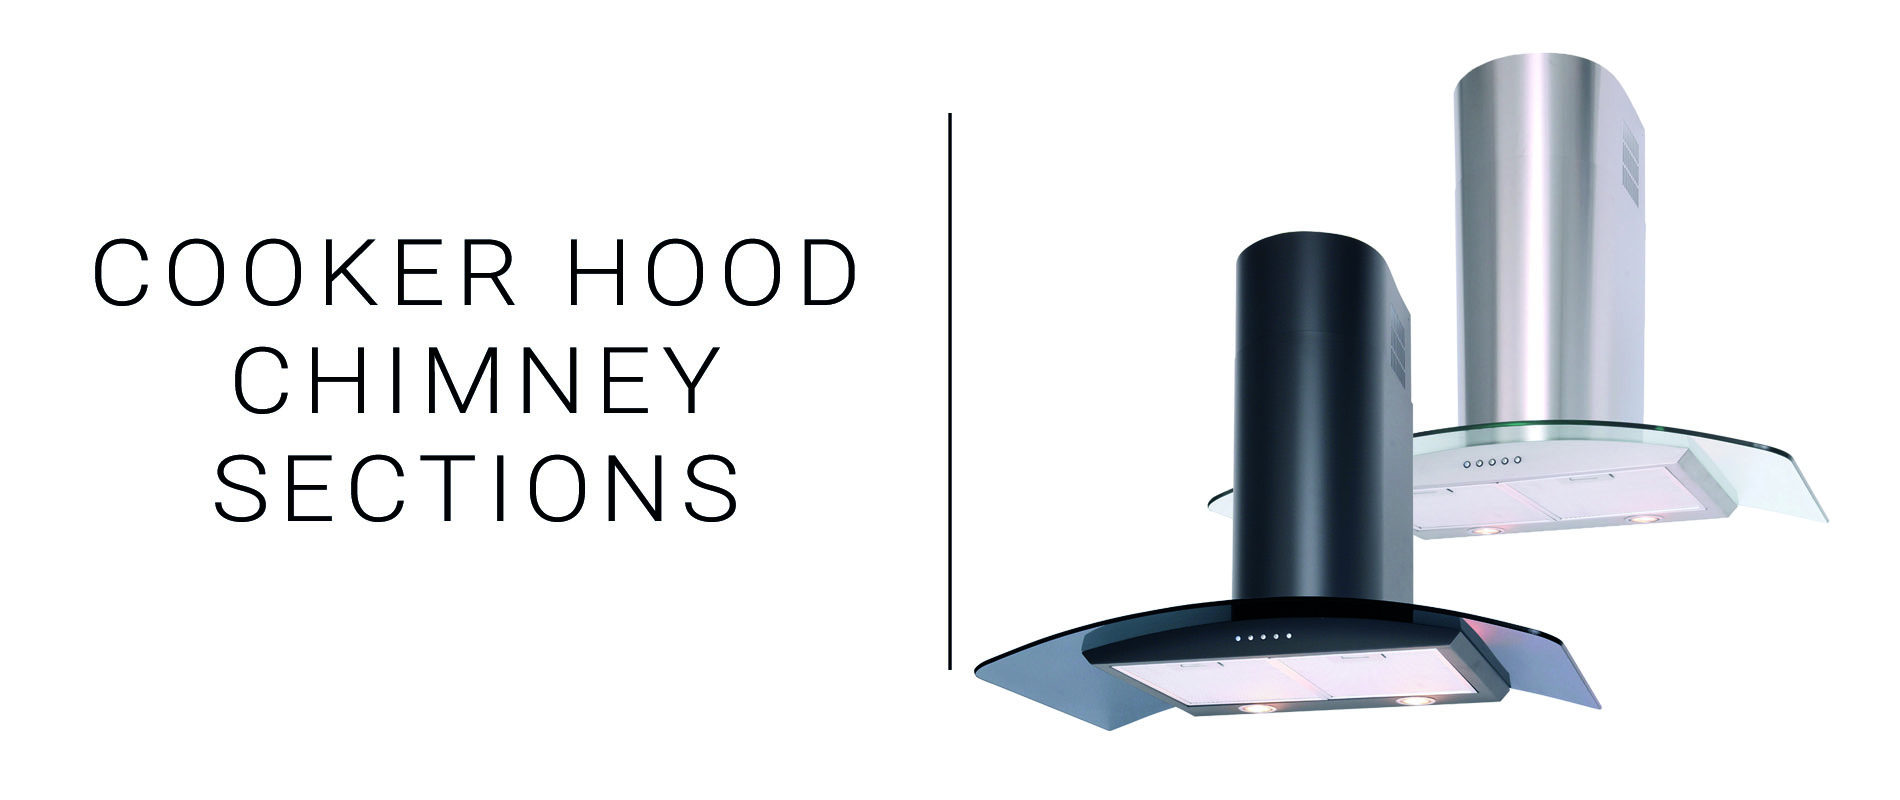 Cooker Hood Chimney Sections